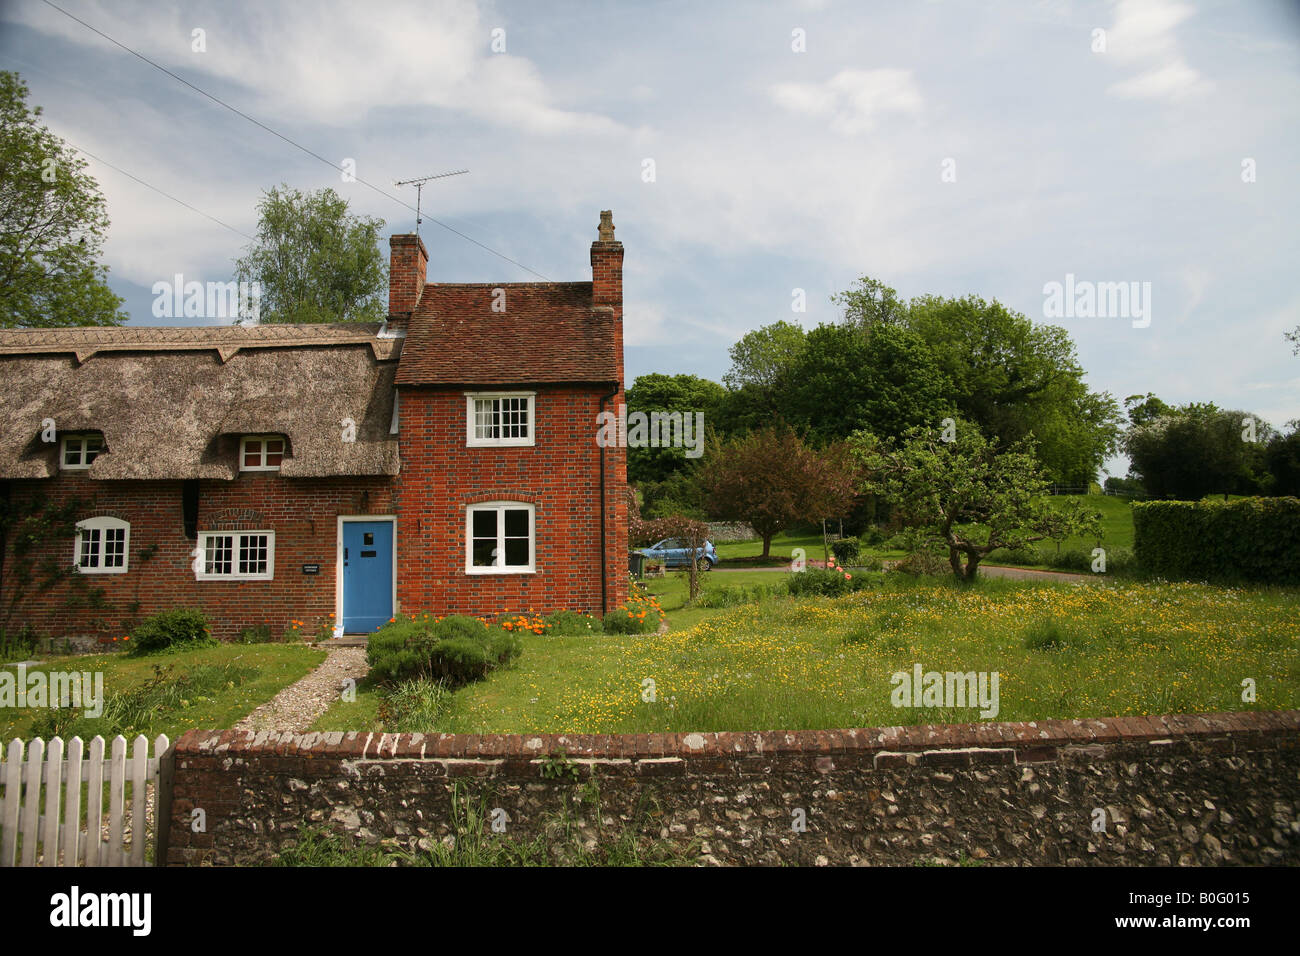 Country cottage in the rural hamlet of Hambledon Stock Photo